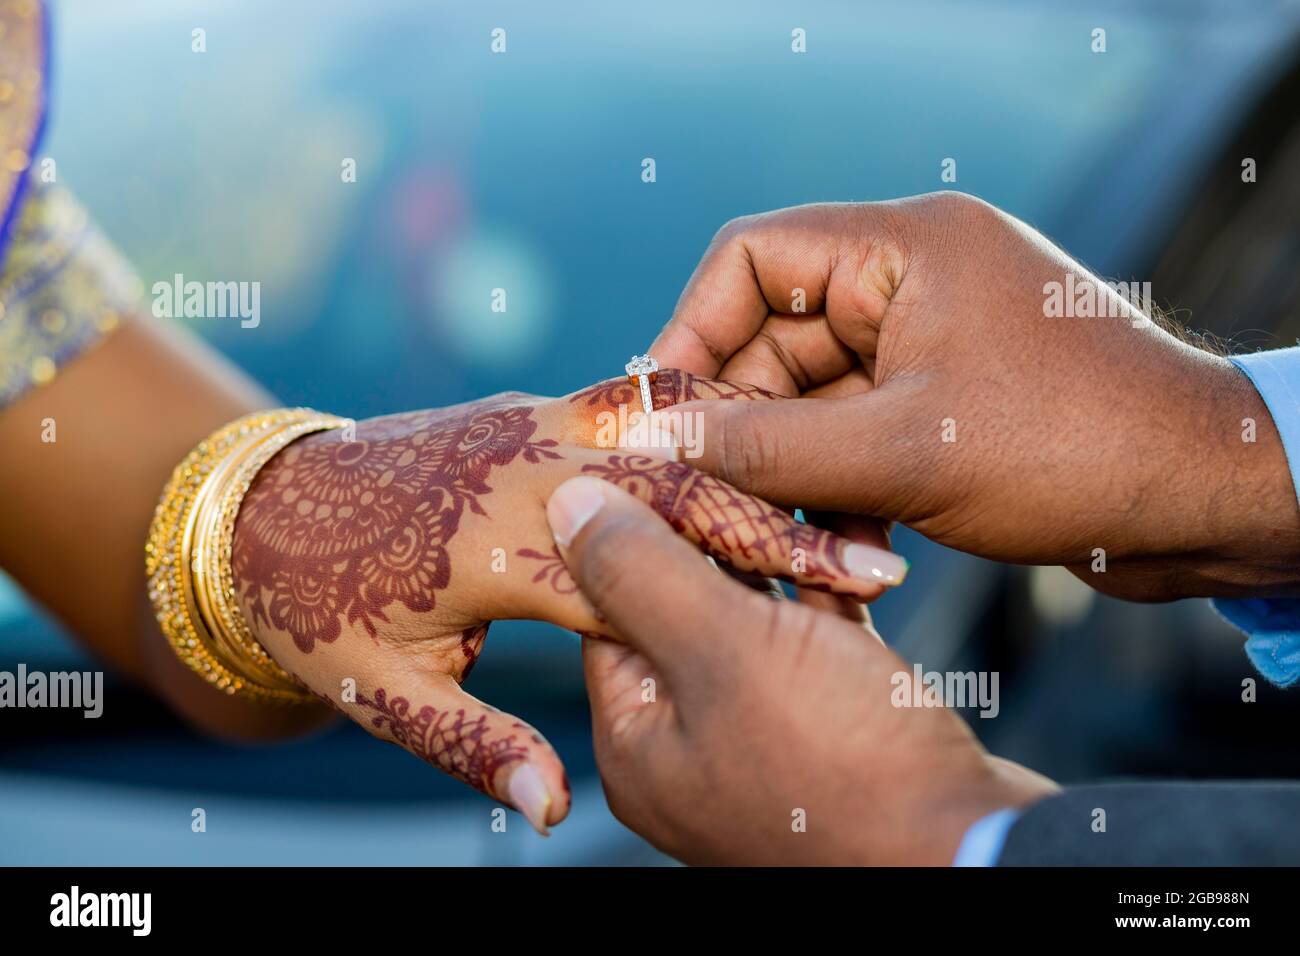 Ring Ceremony In Hindi: Indian Engagement Ceremony - 99Pandit